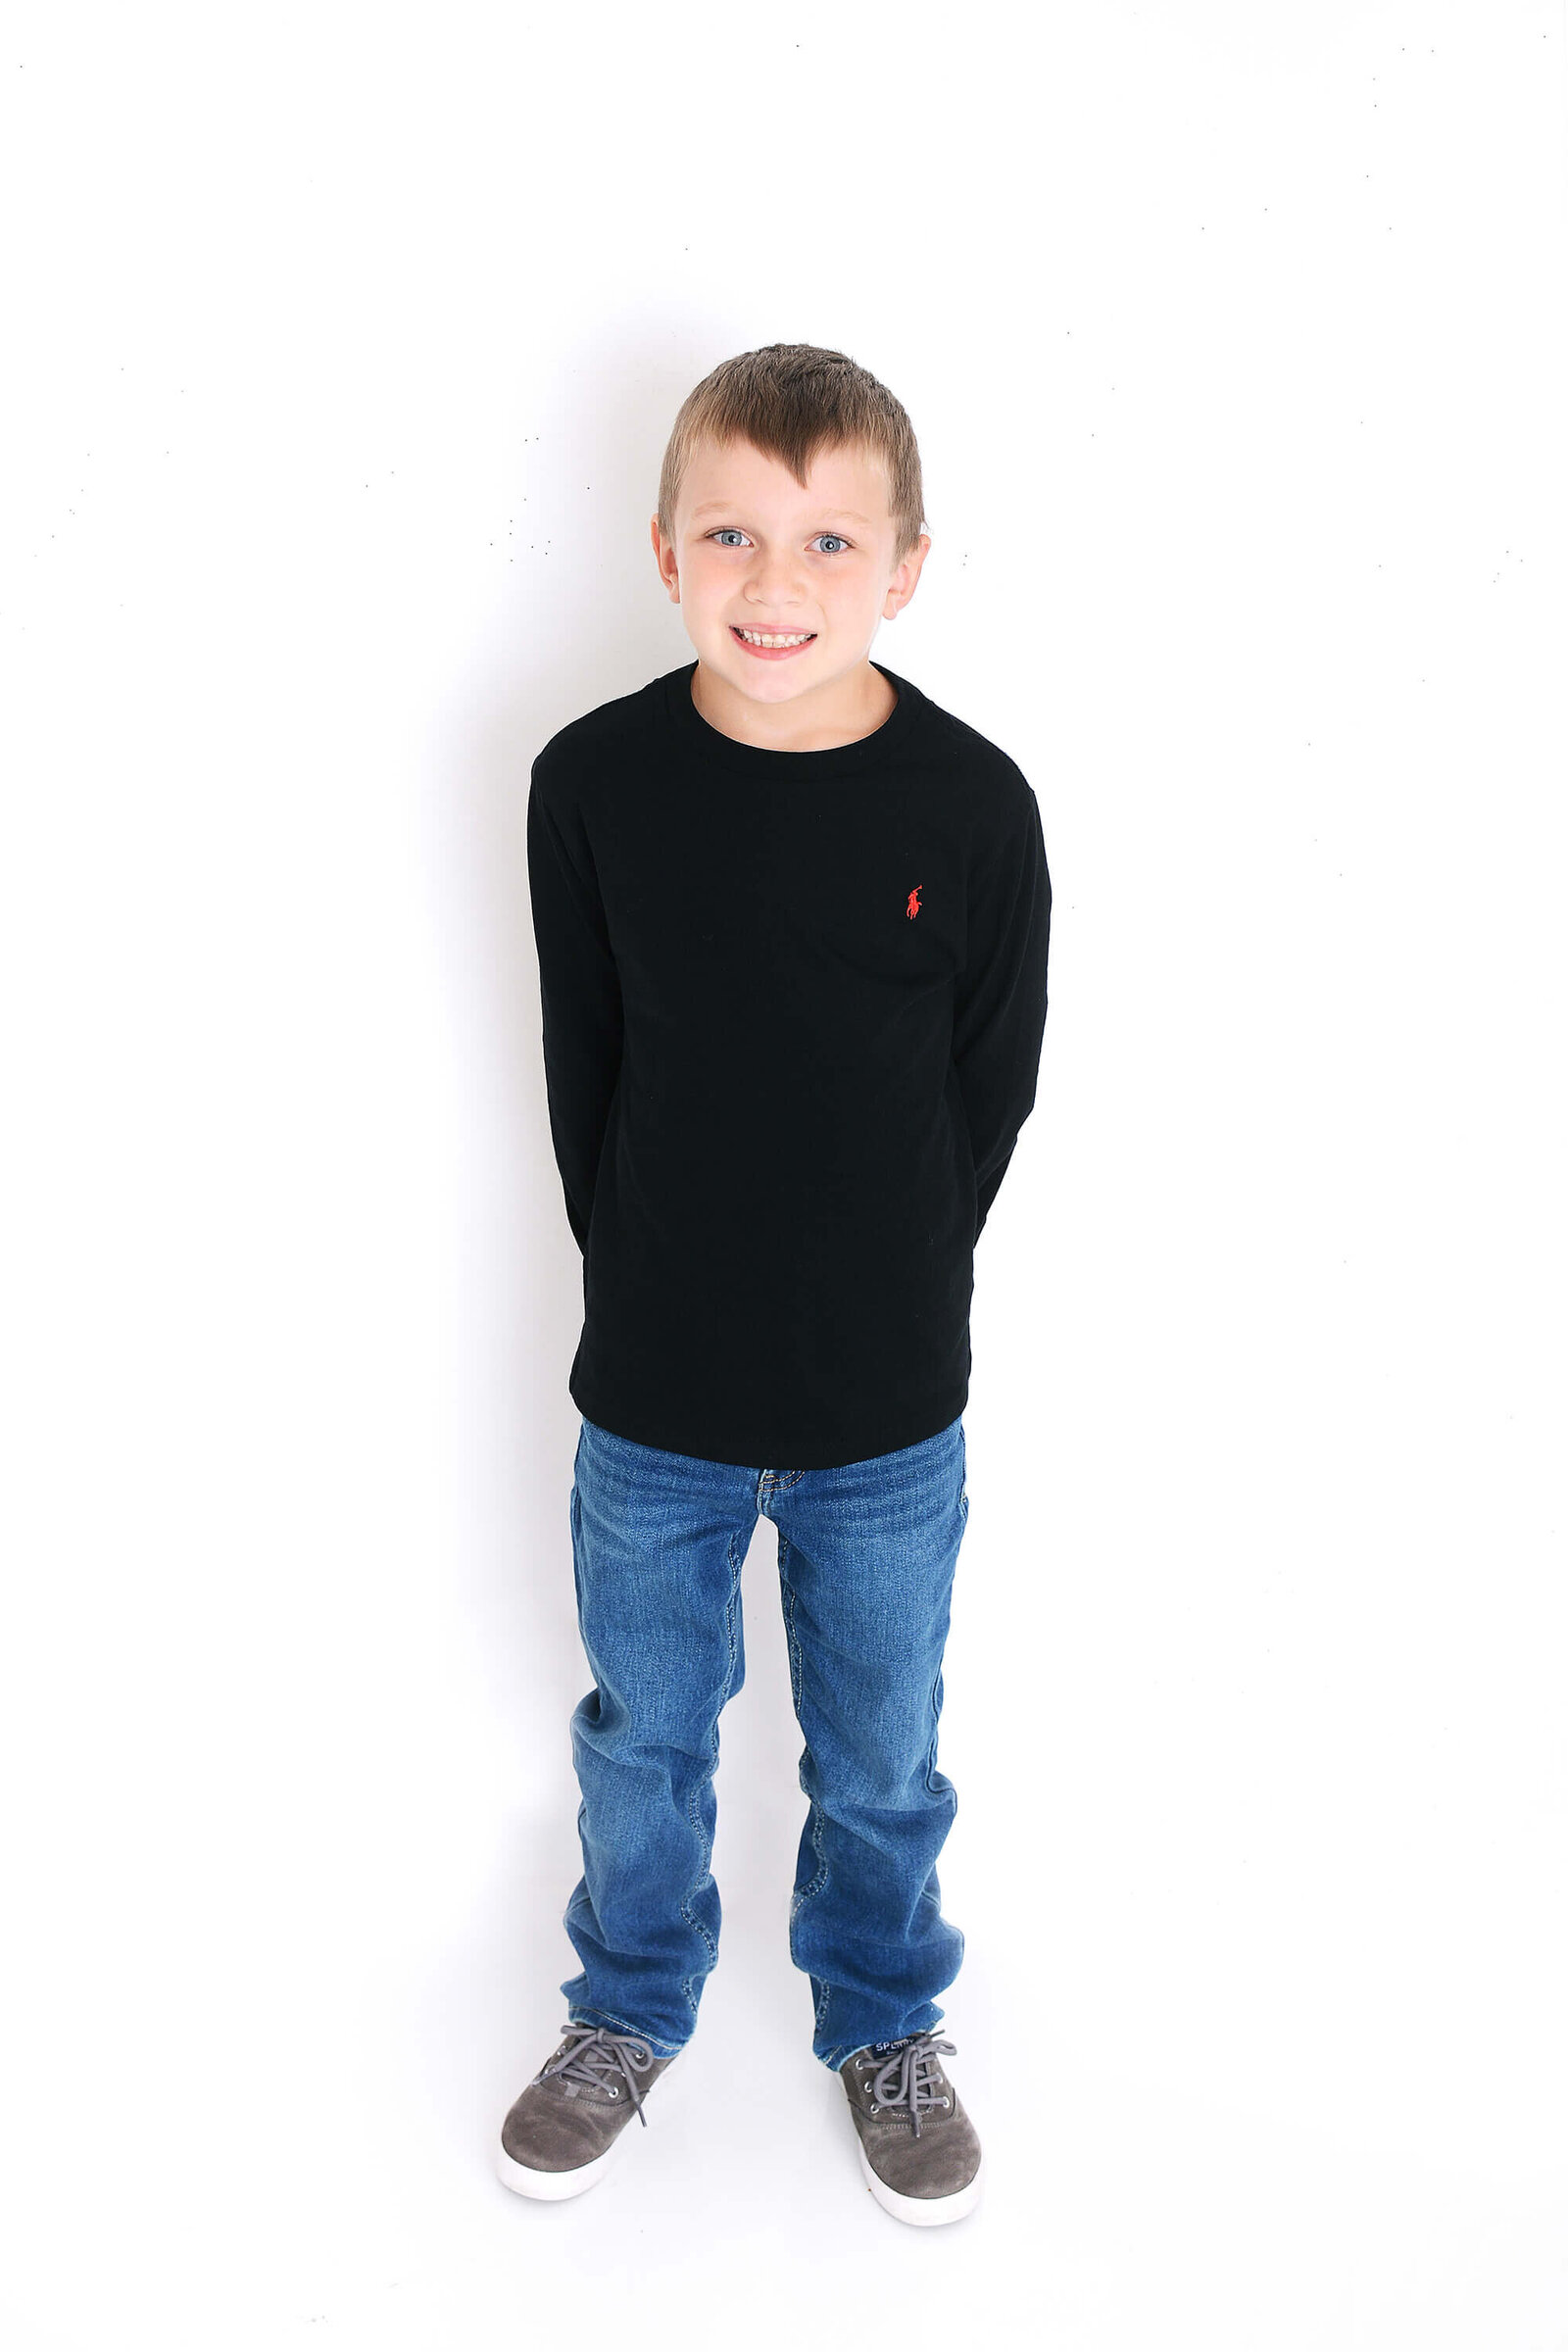 boy smiles at the camera in front of a white background